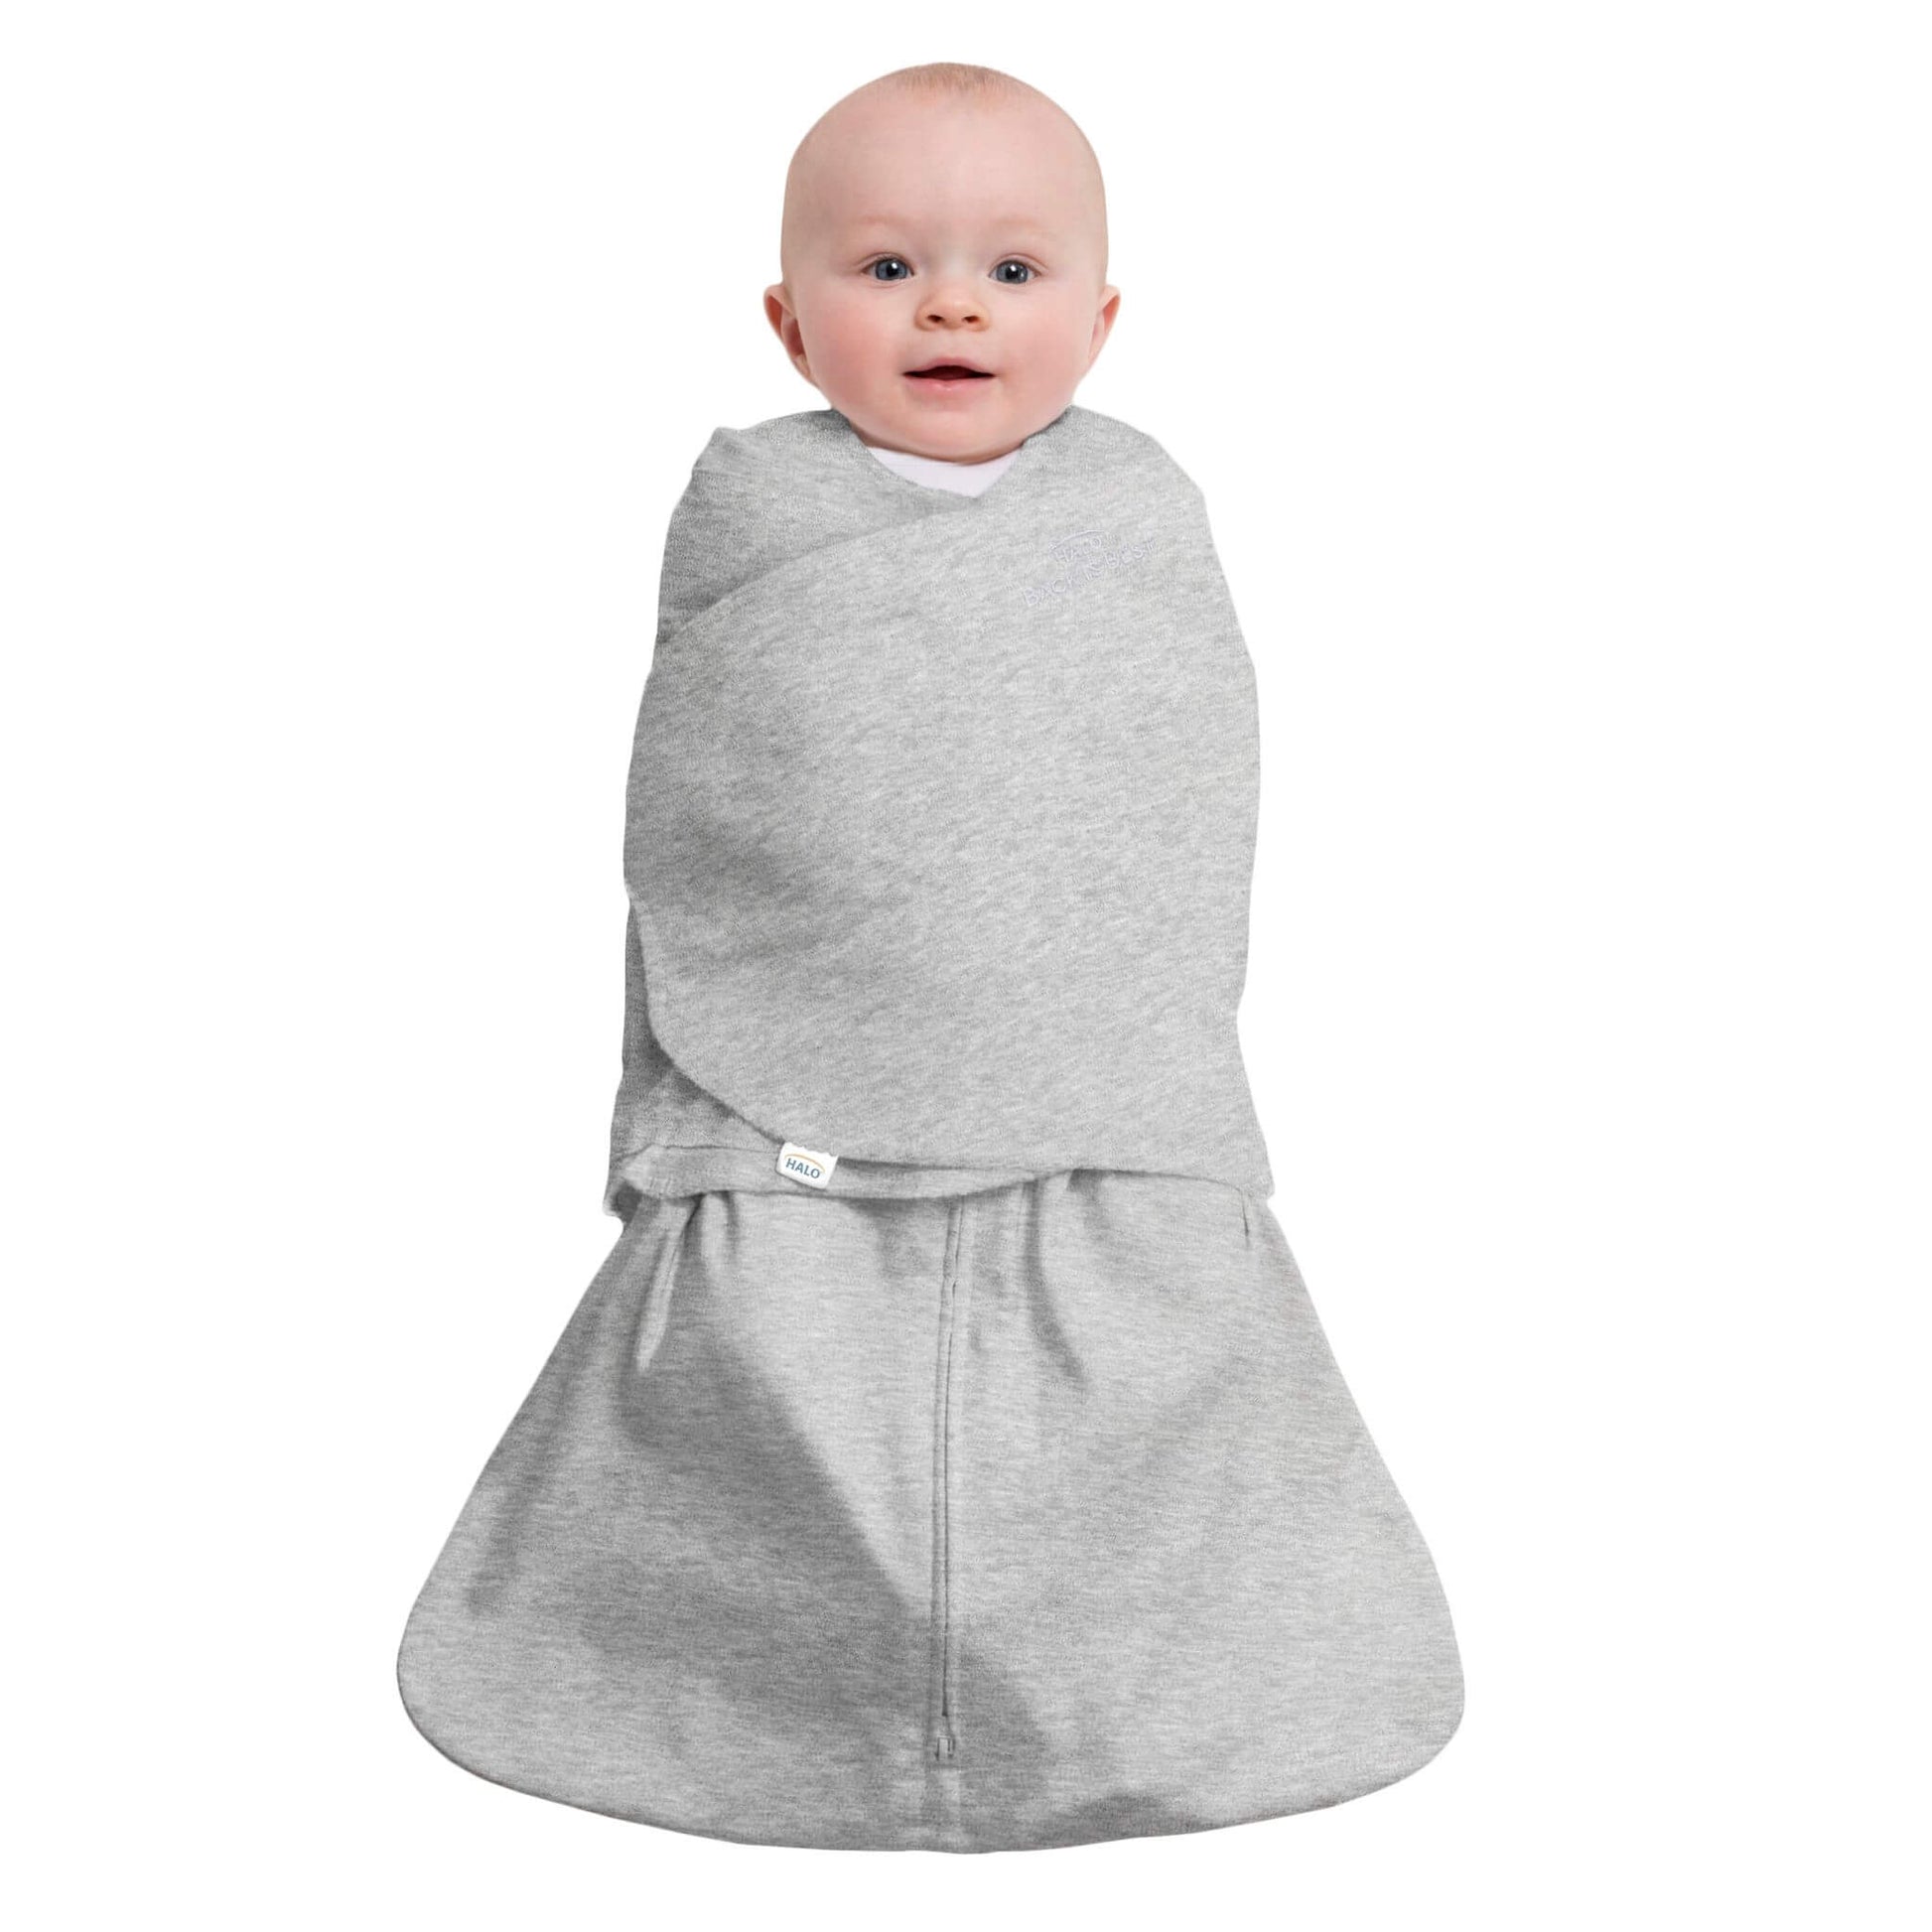 The adjustable HALO® SleepSack swaddle provides 3 easy ways to swaddle to ensure your baby’s best sleep and to help make the transition from swaddling easier.